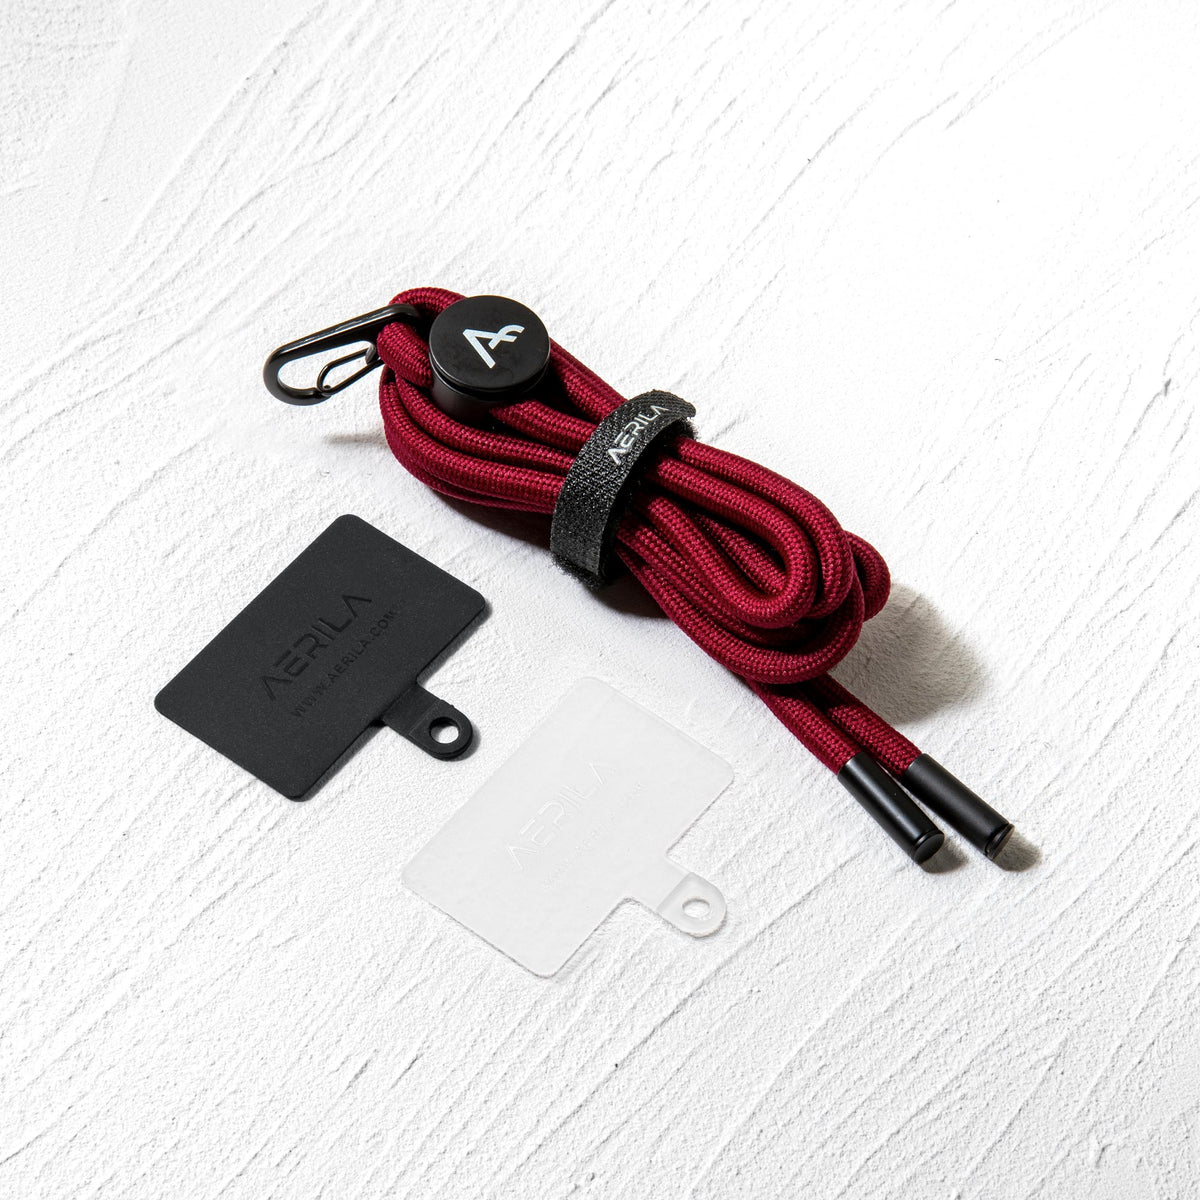 NORE Phone Lanyard set with Connector Patch Card | PHANTOM Collection - AERILA